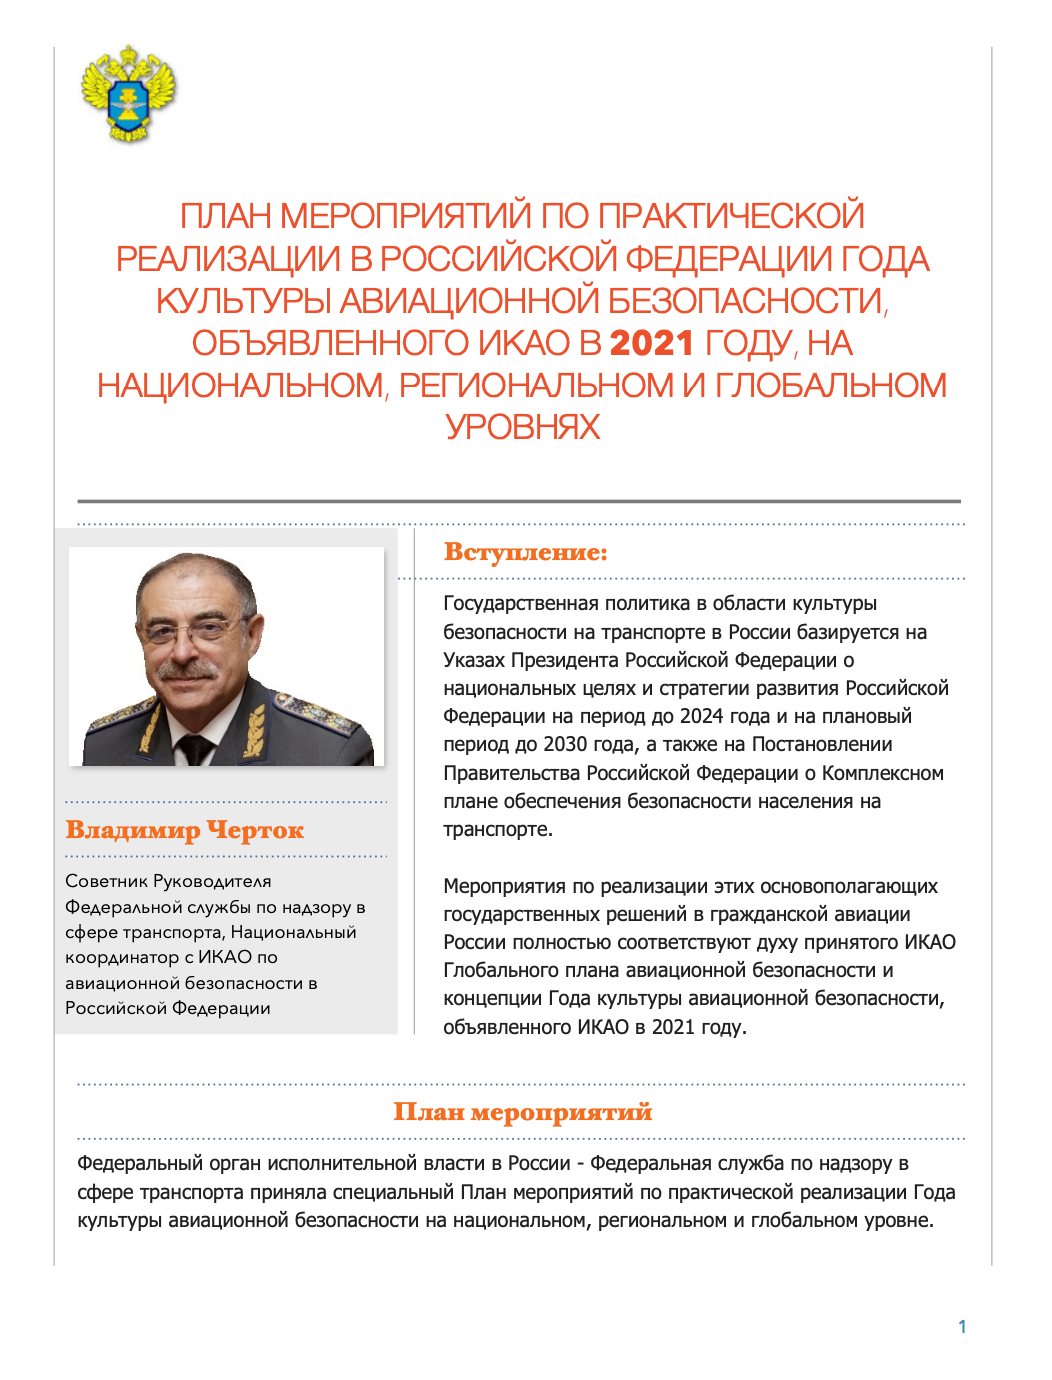 Russian Federation - the article by Mr. Chertok.png